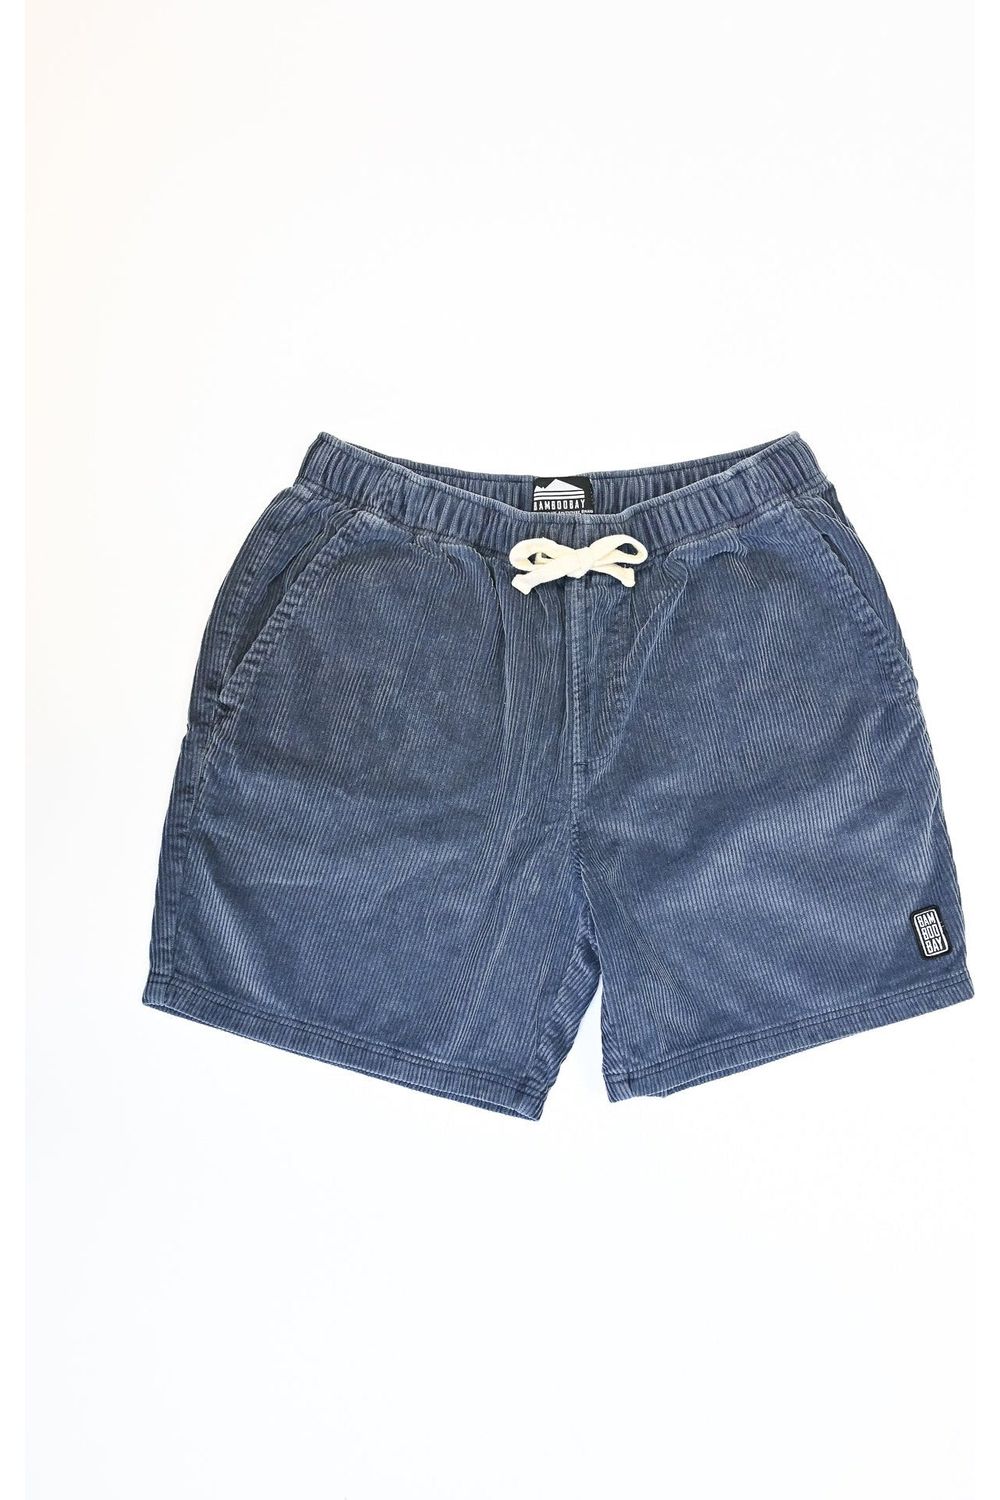 Bamboobay Cord Shorts in navy studio image showing full front